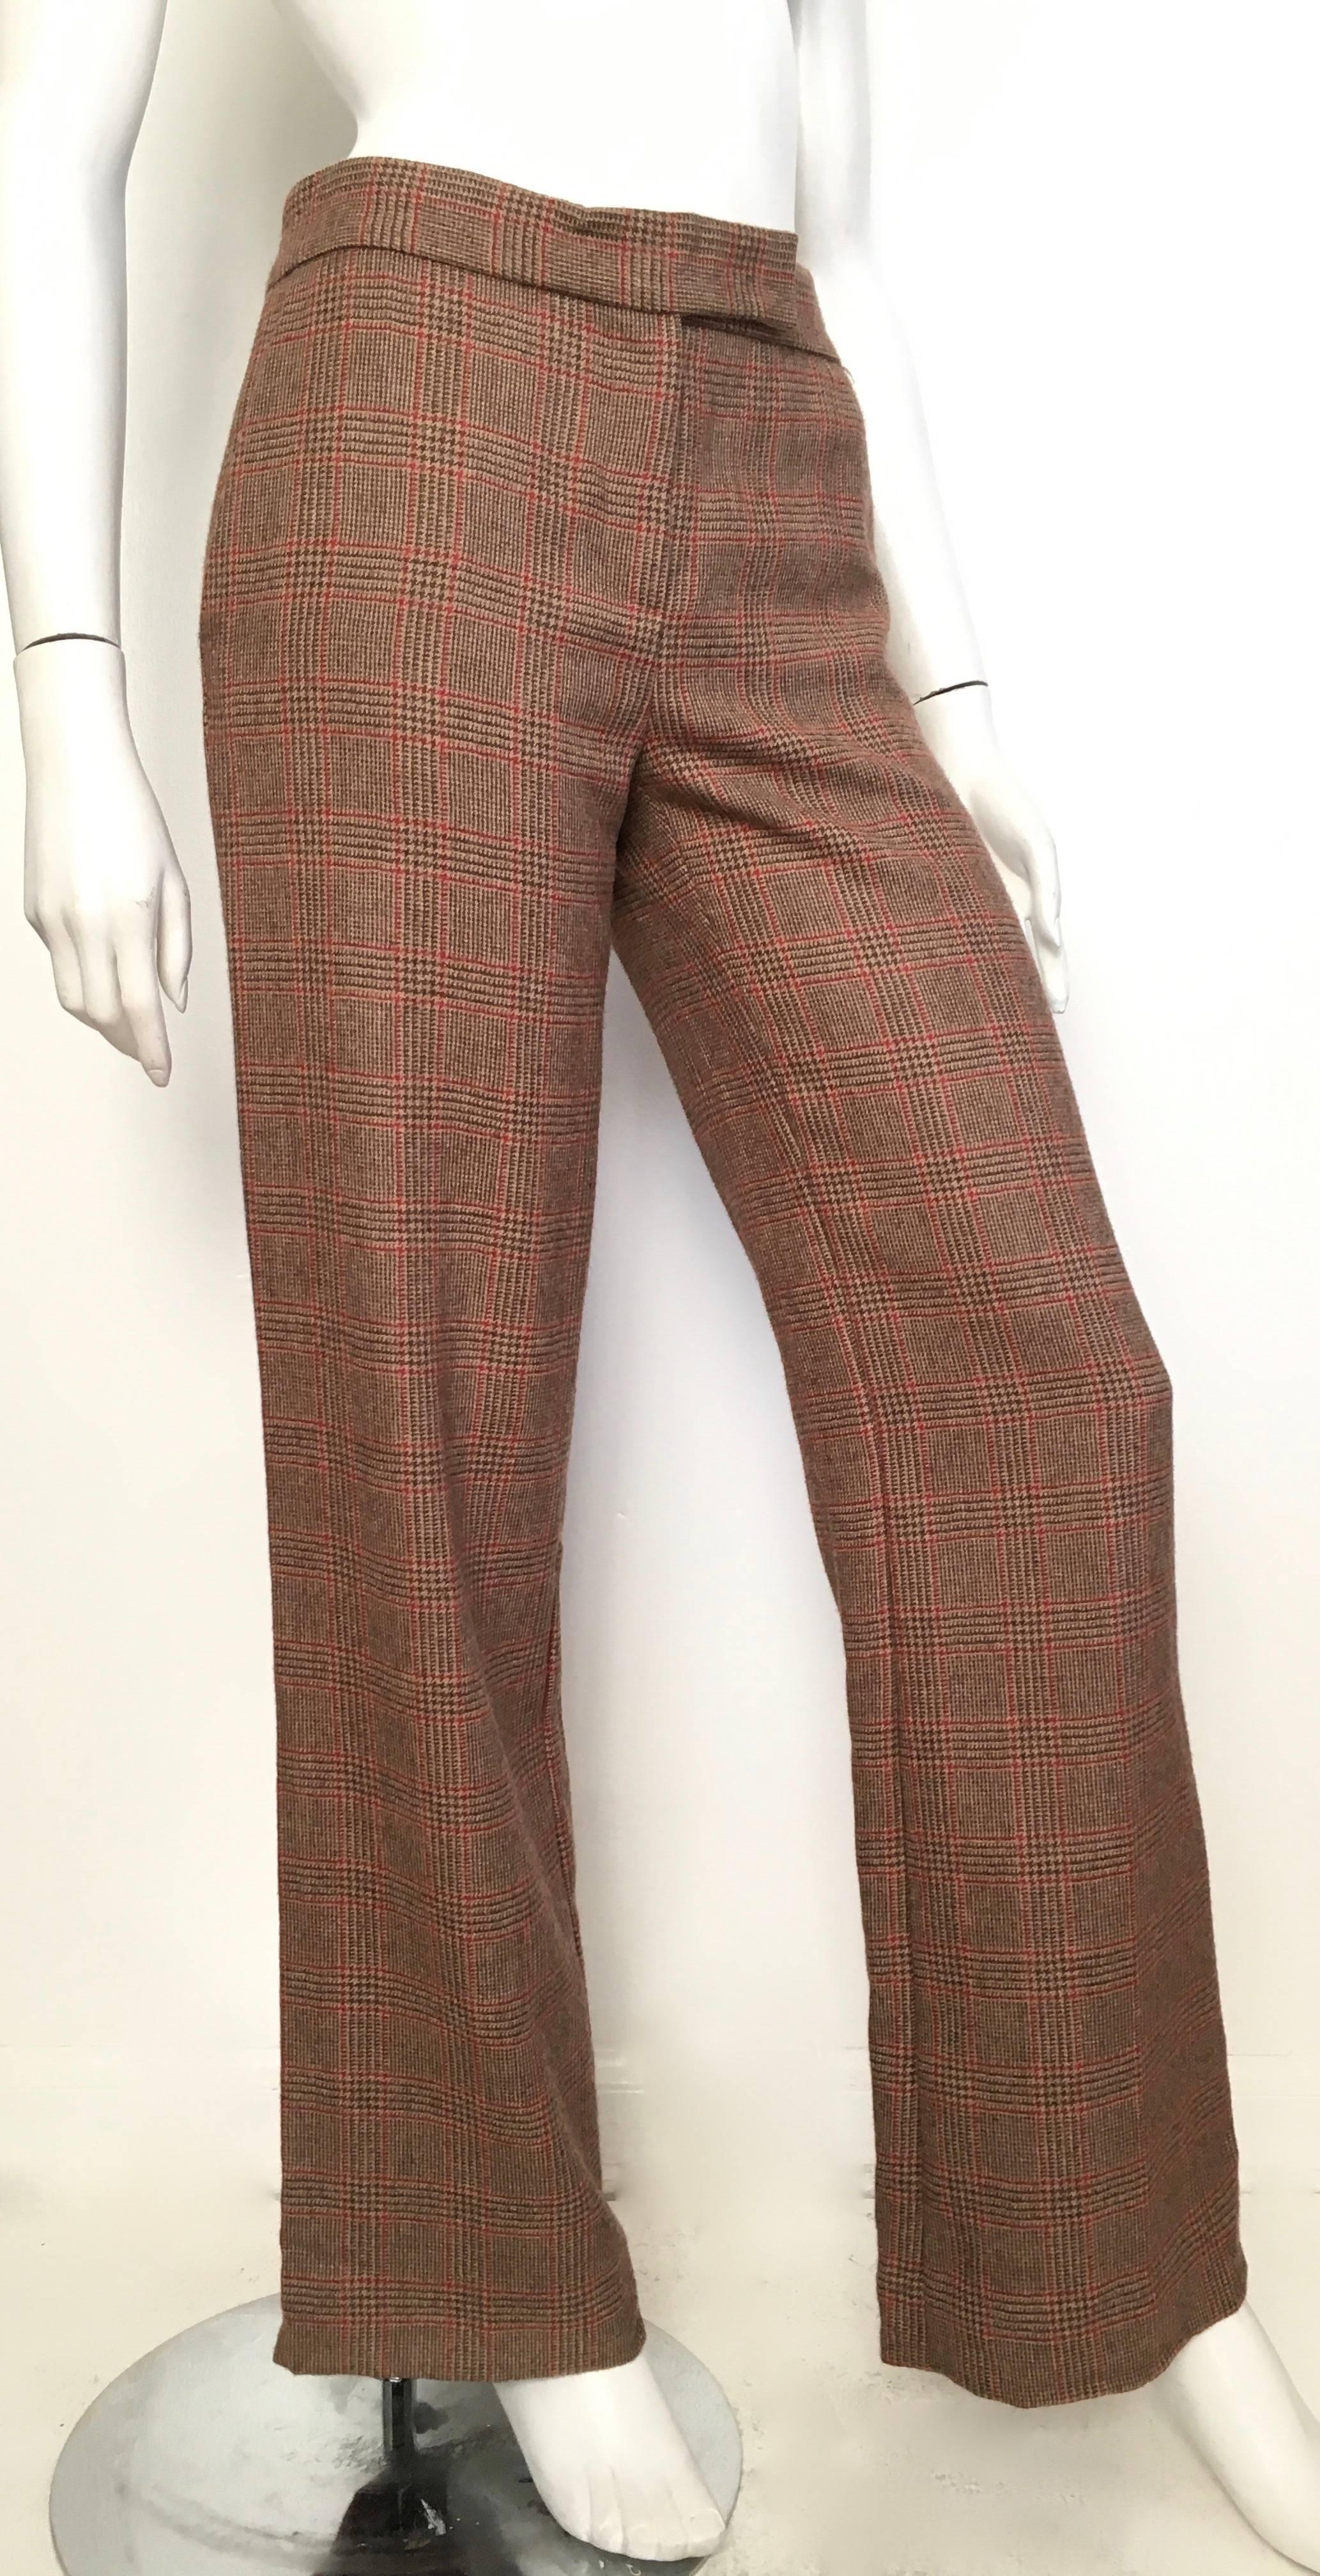 Blumarine glen plaid alpaca & wool fabric pants with pockets is an Italian size 40 and an USA size 4. These pants fit Matilda the Mannequin perfectly so if you have the body type of Matilda, it's a green light... These pants are not lined.